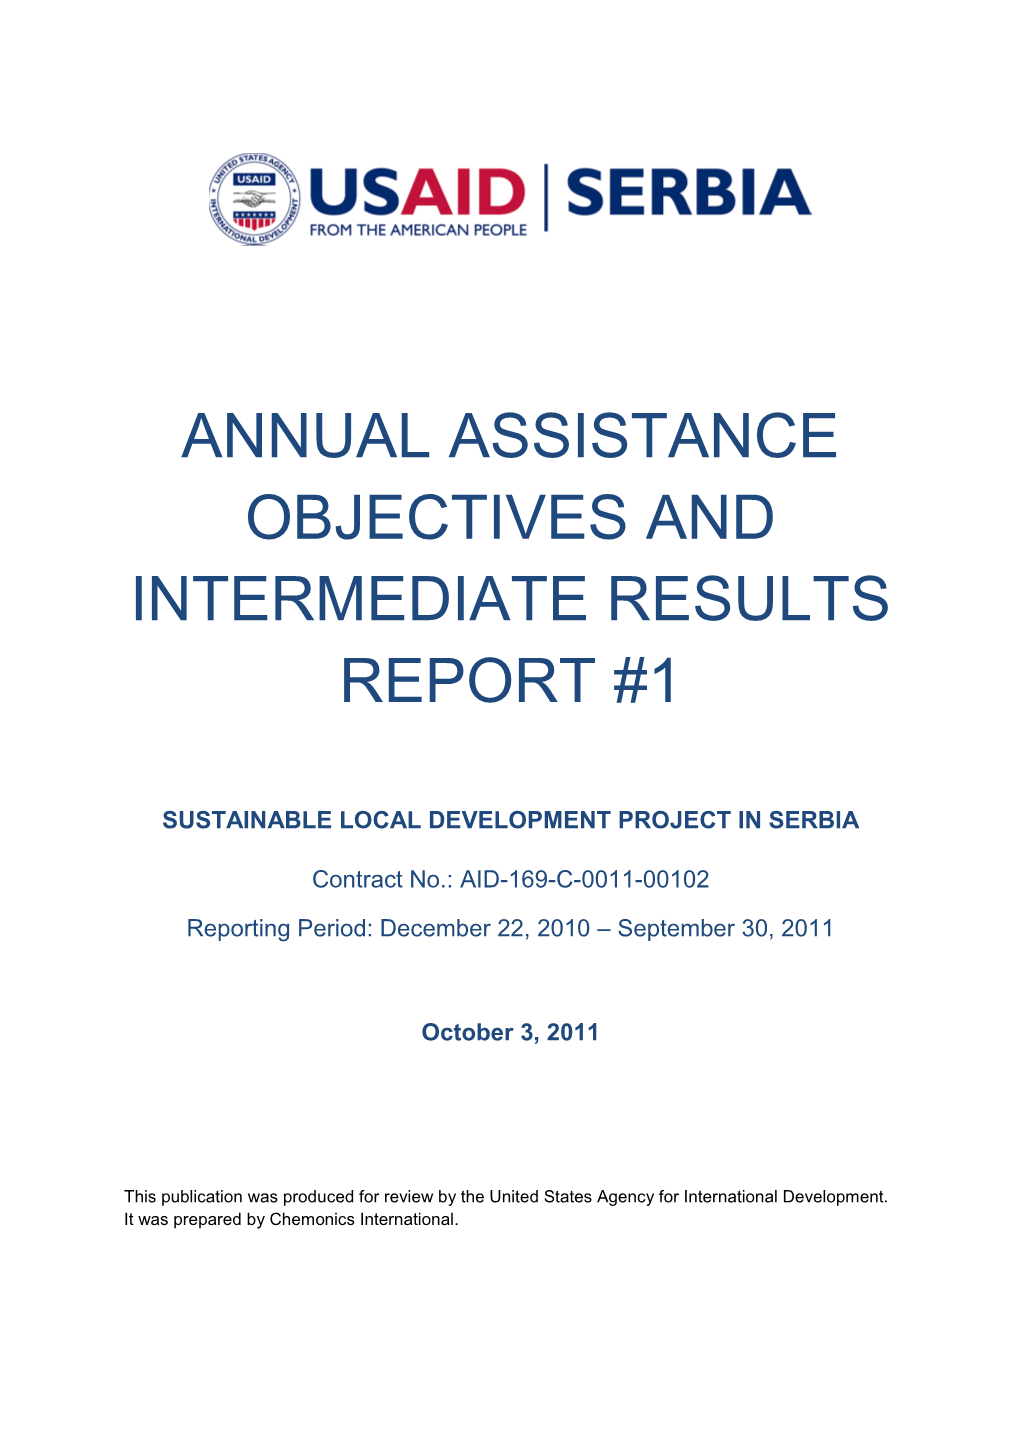 Annual Assistance Objectives and Intermediate Results Report #1